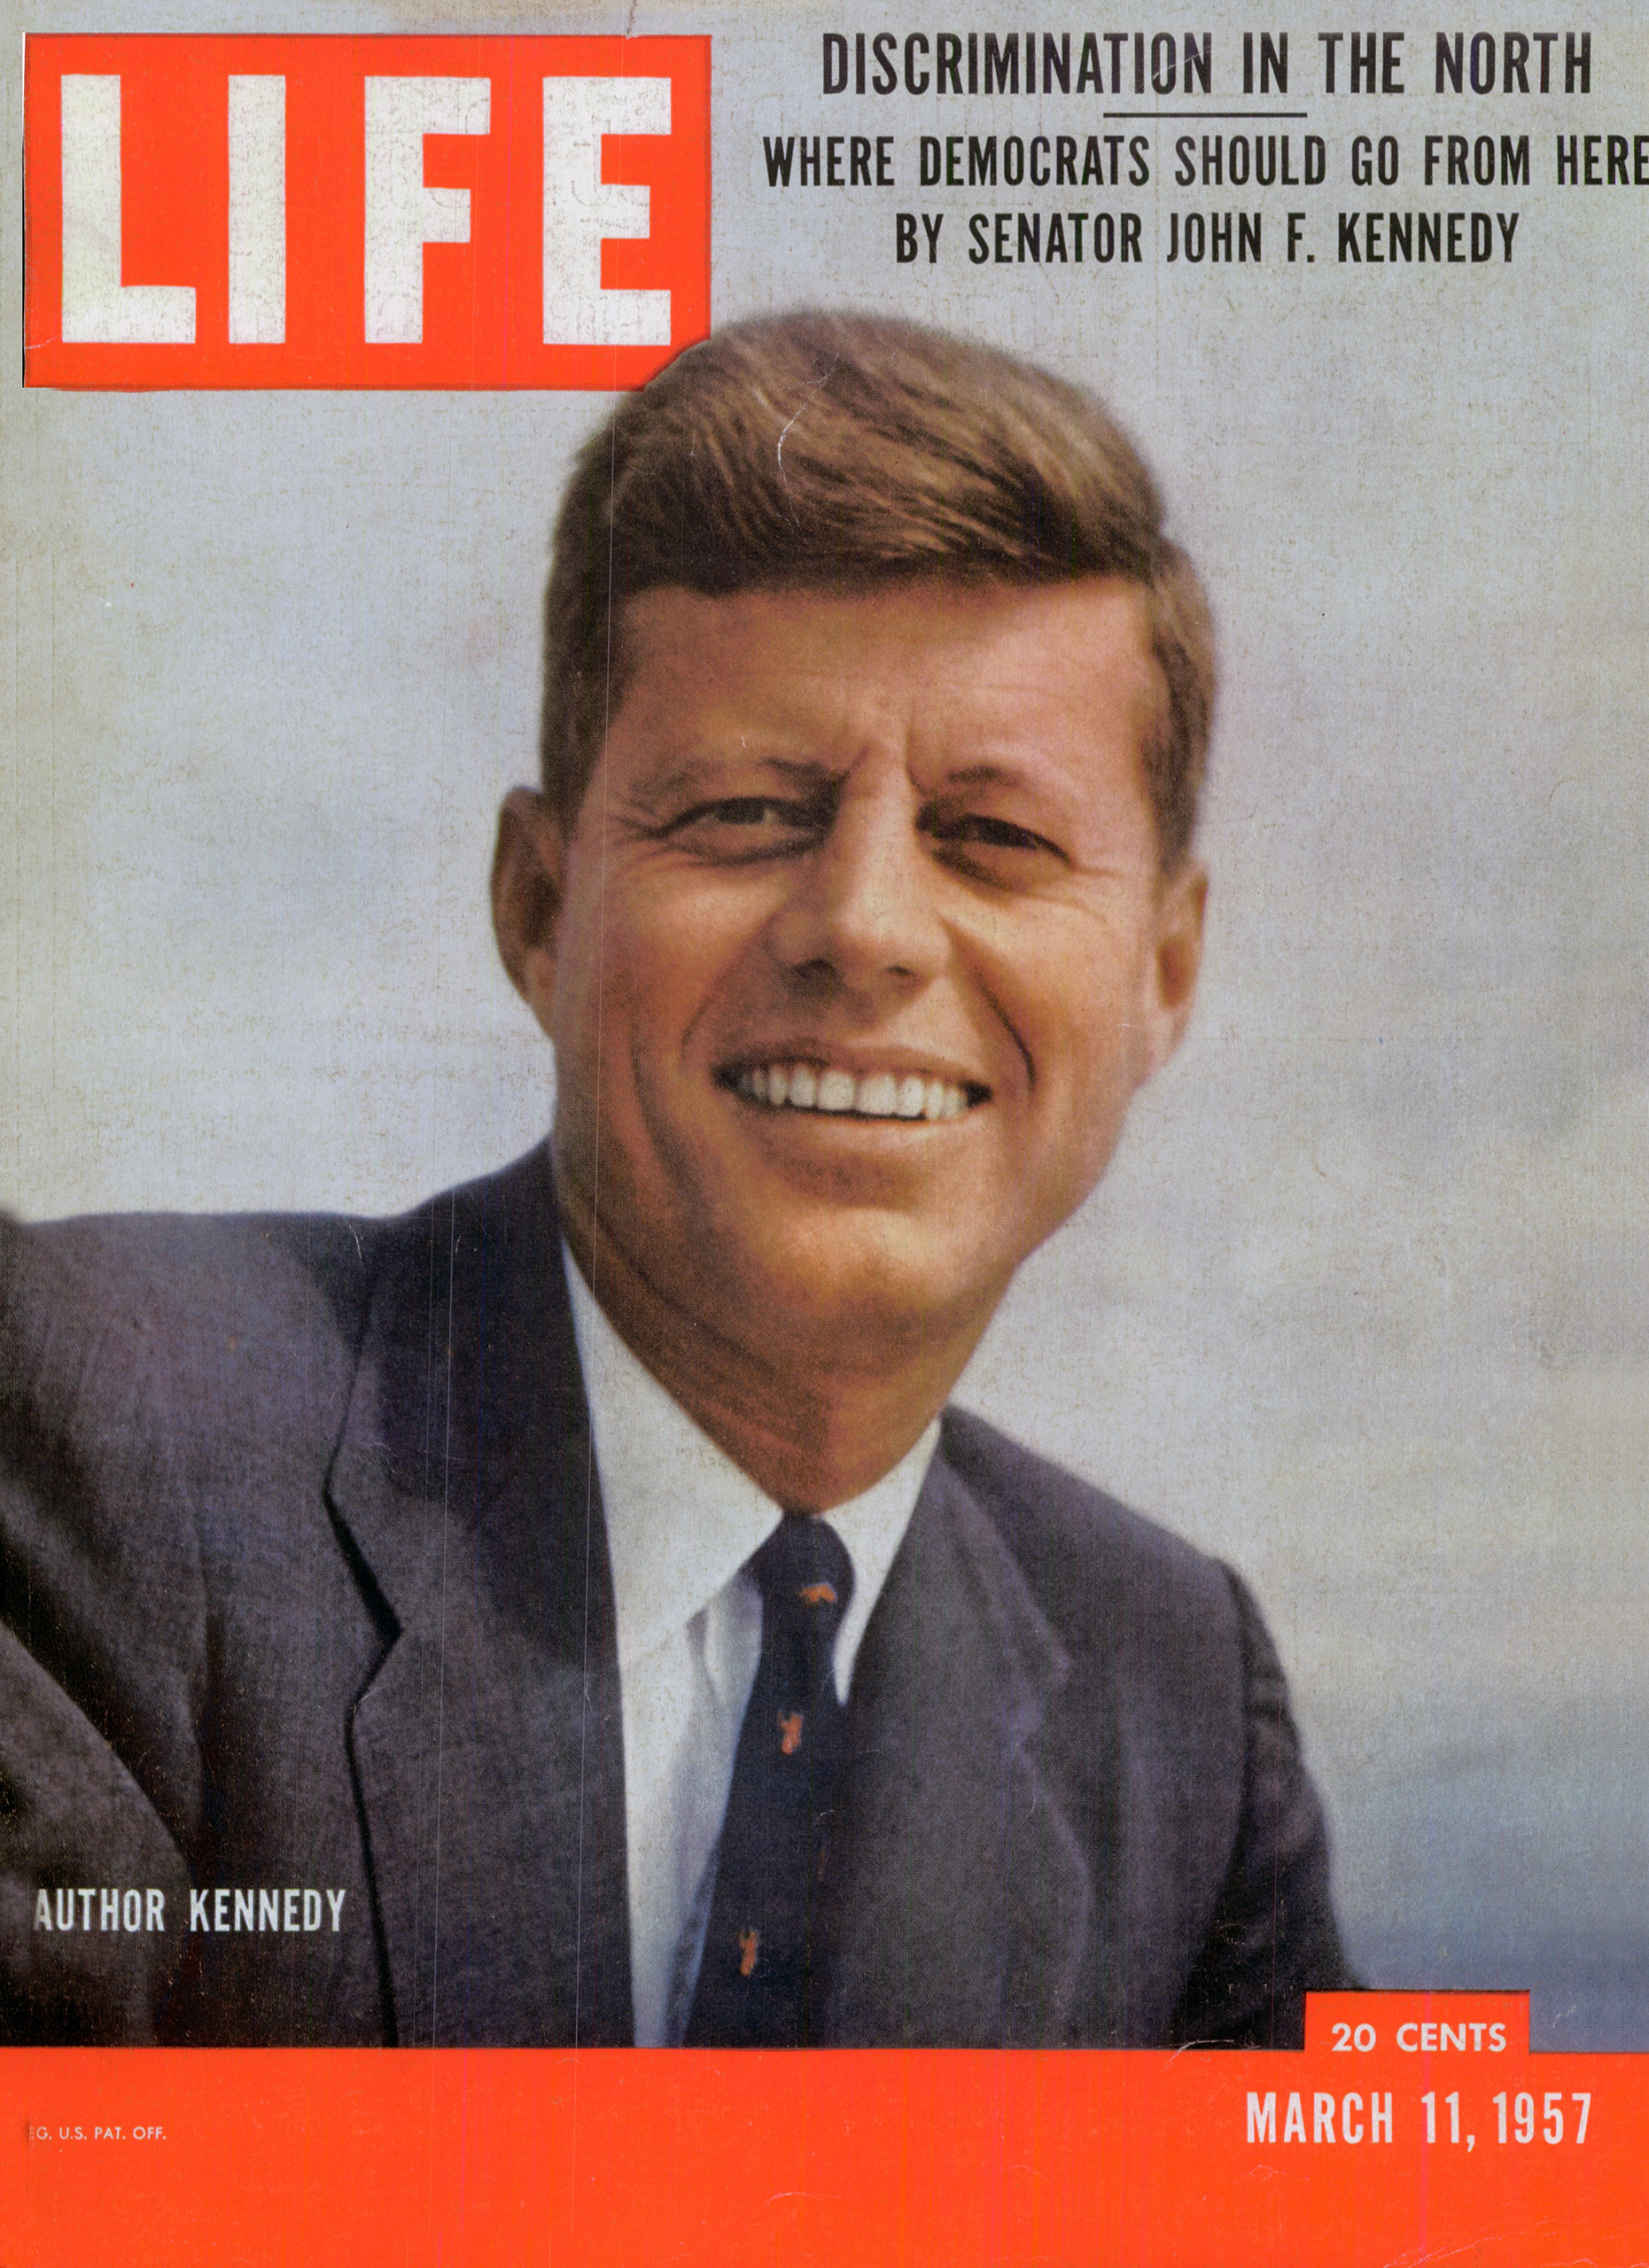 Mar. 11, 1957 cover of LIFE magazine. Cover photo by Hank Walker.